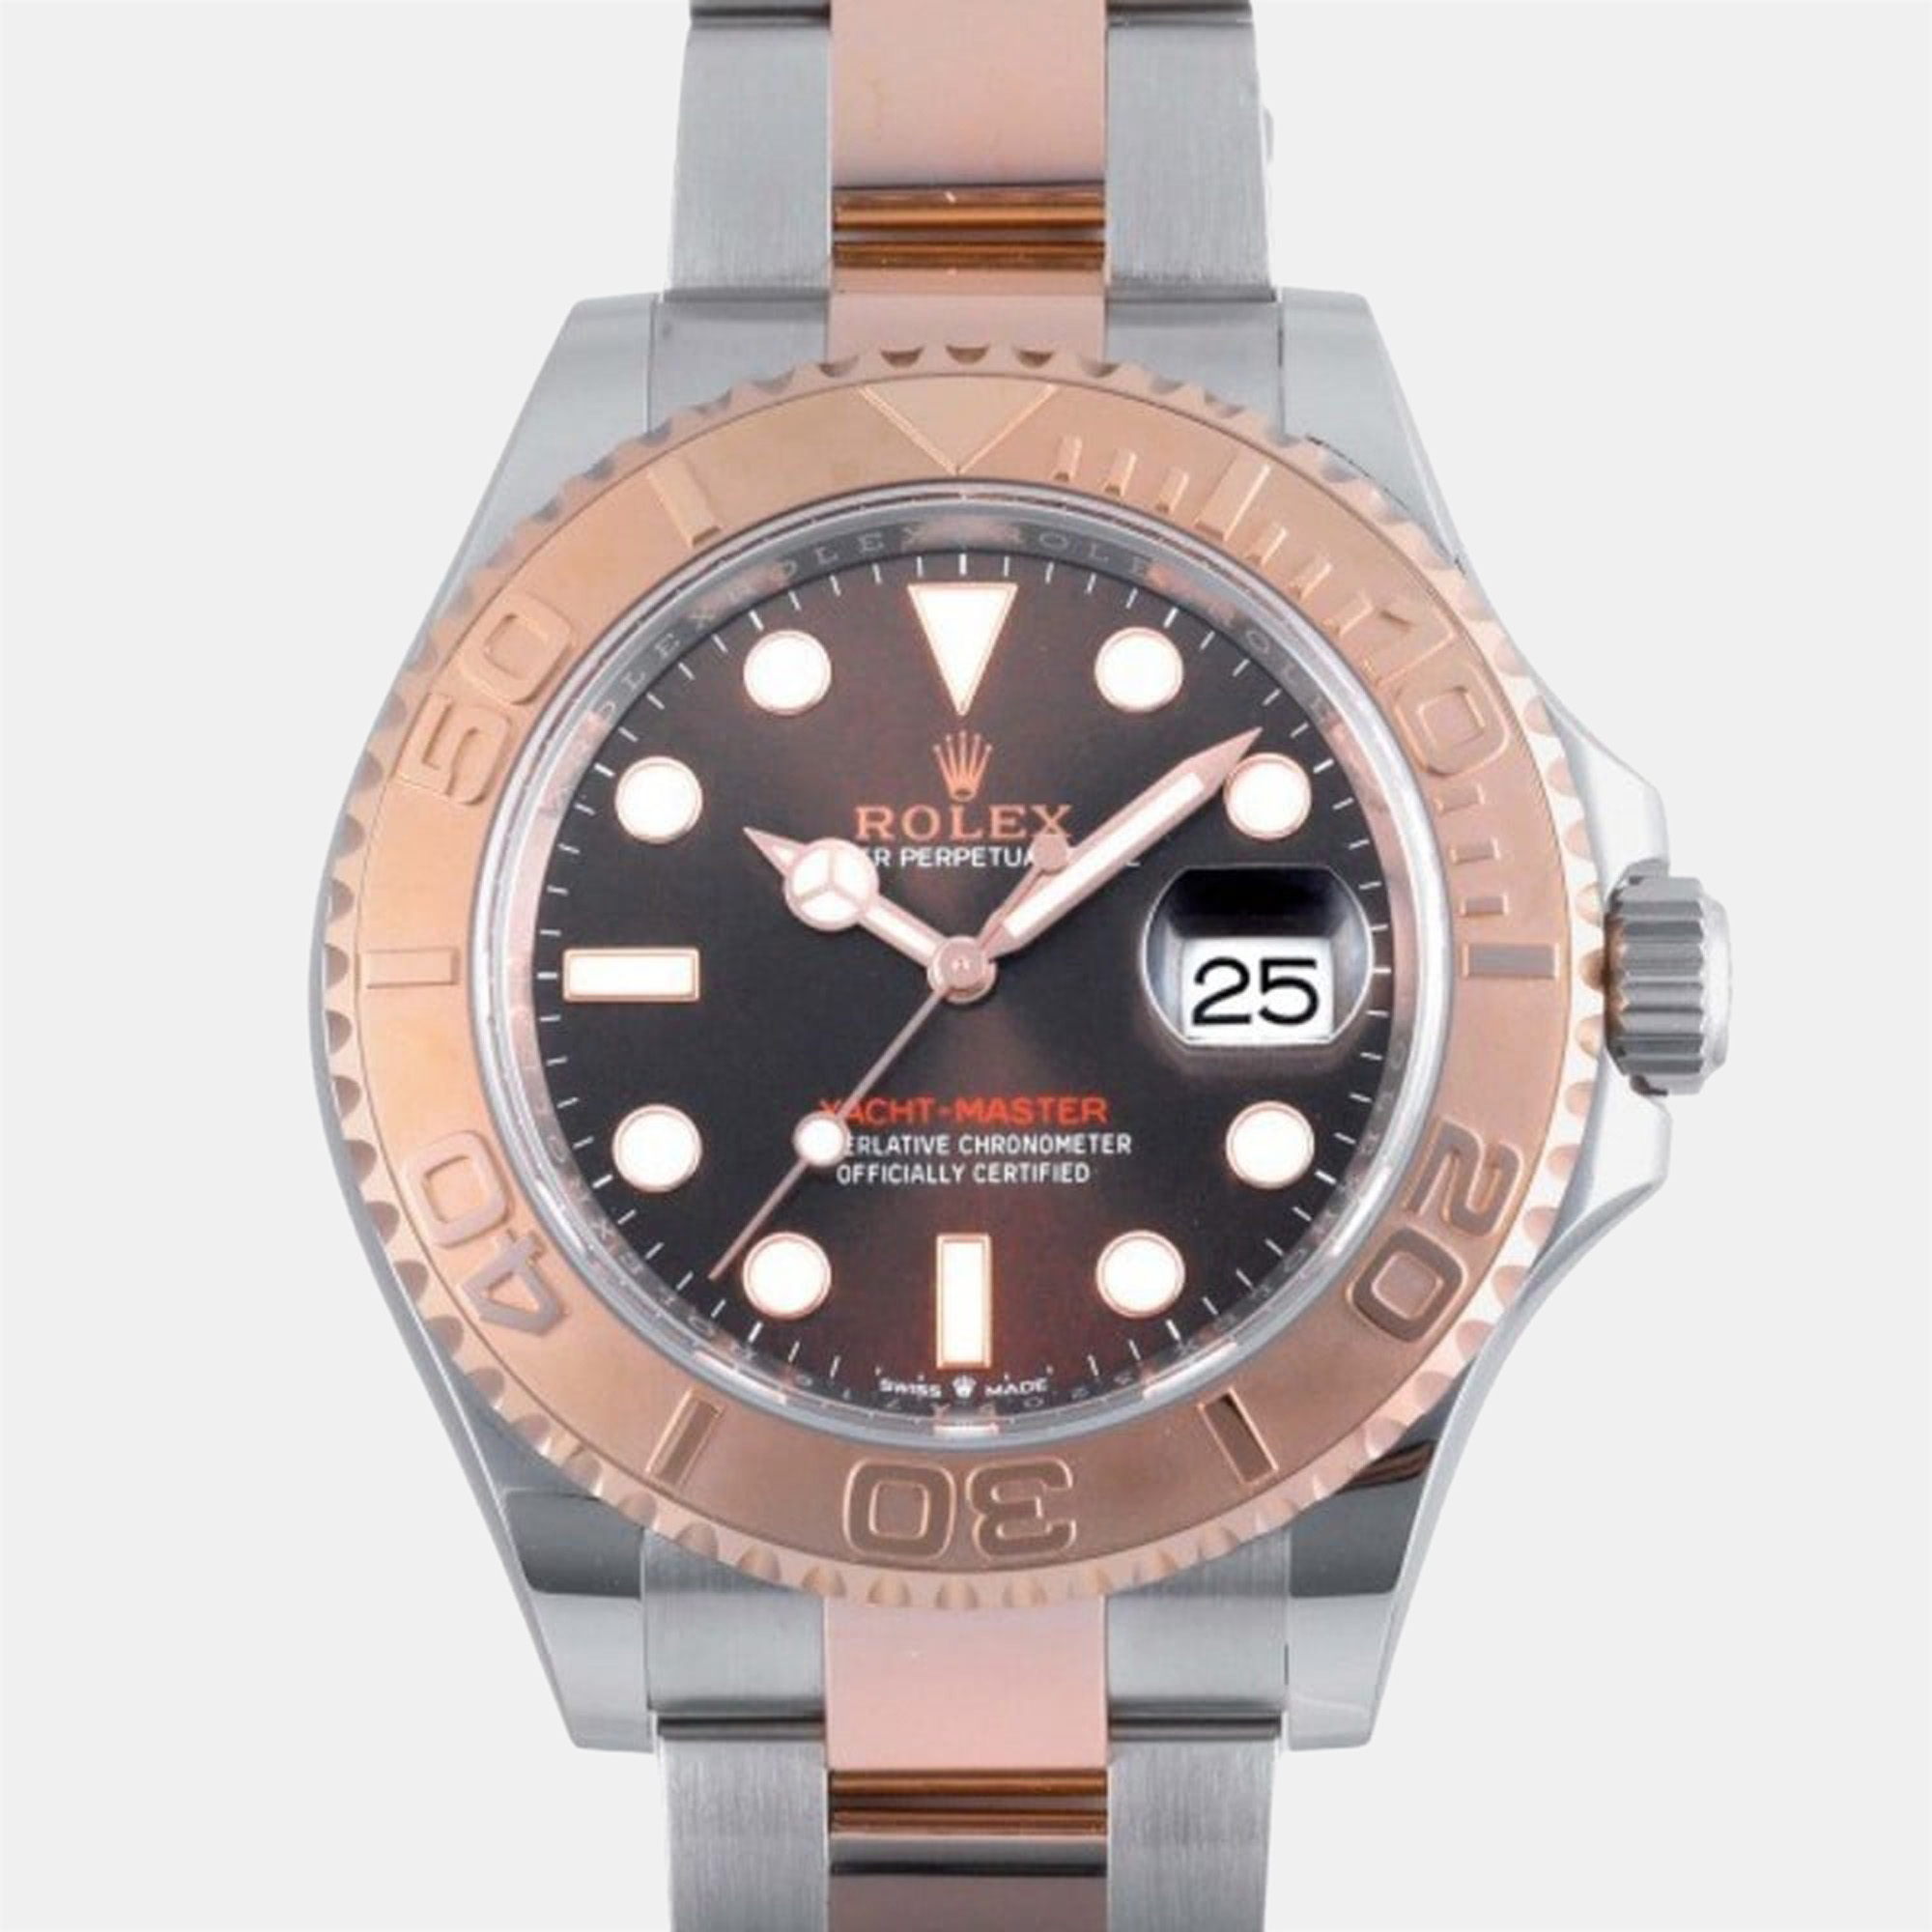 Rolex brown 18k rose gold and stainless steel yacht-master 126621 automatic men's wristwatch 40 mm